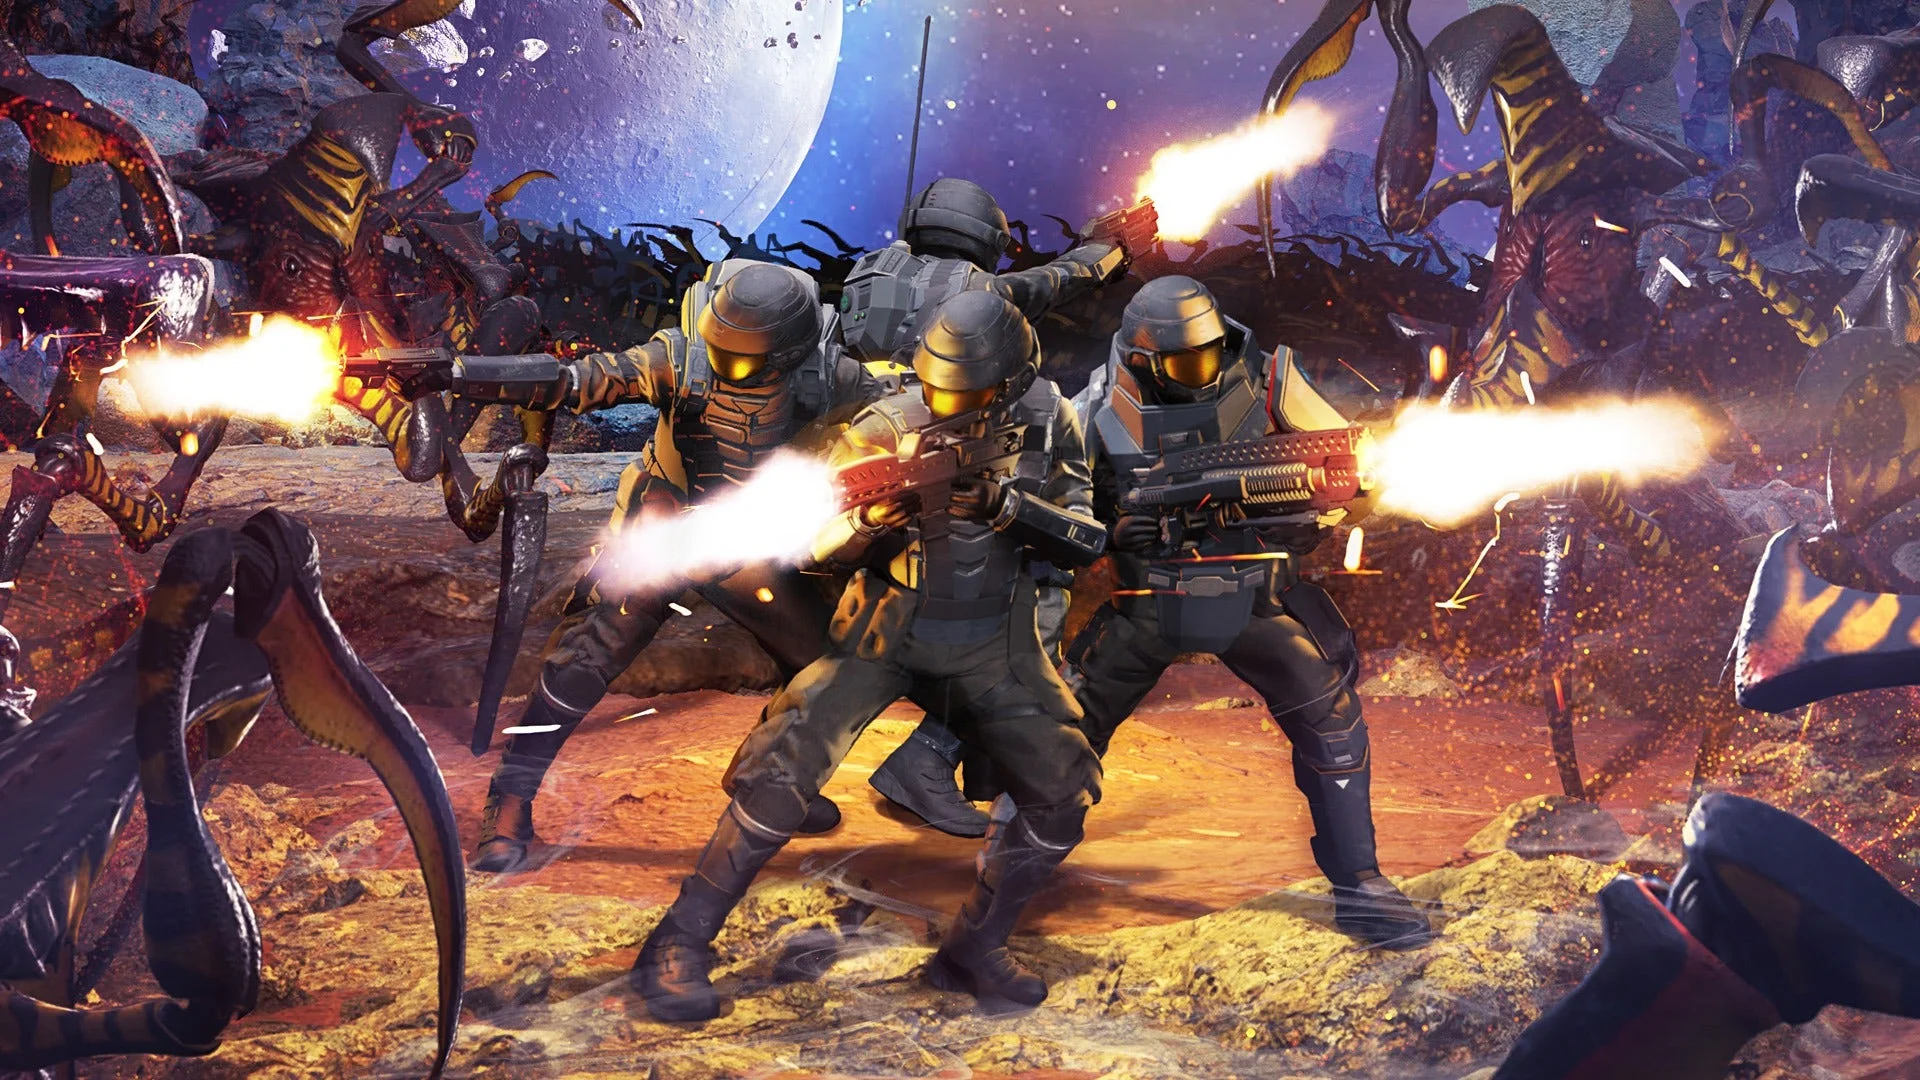 The release date of the fantastic action game Starship Troopers Extermination has become known